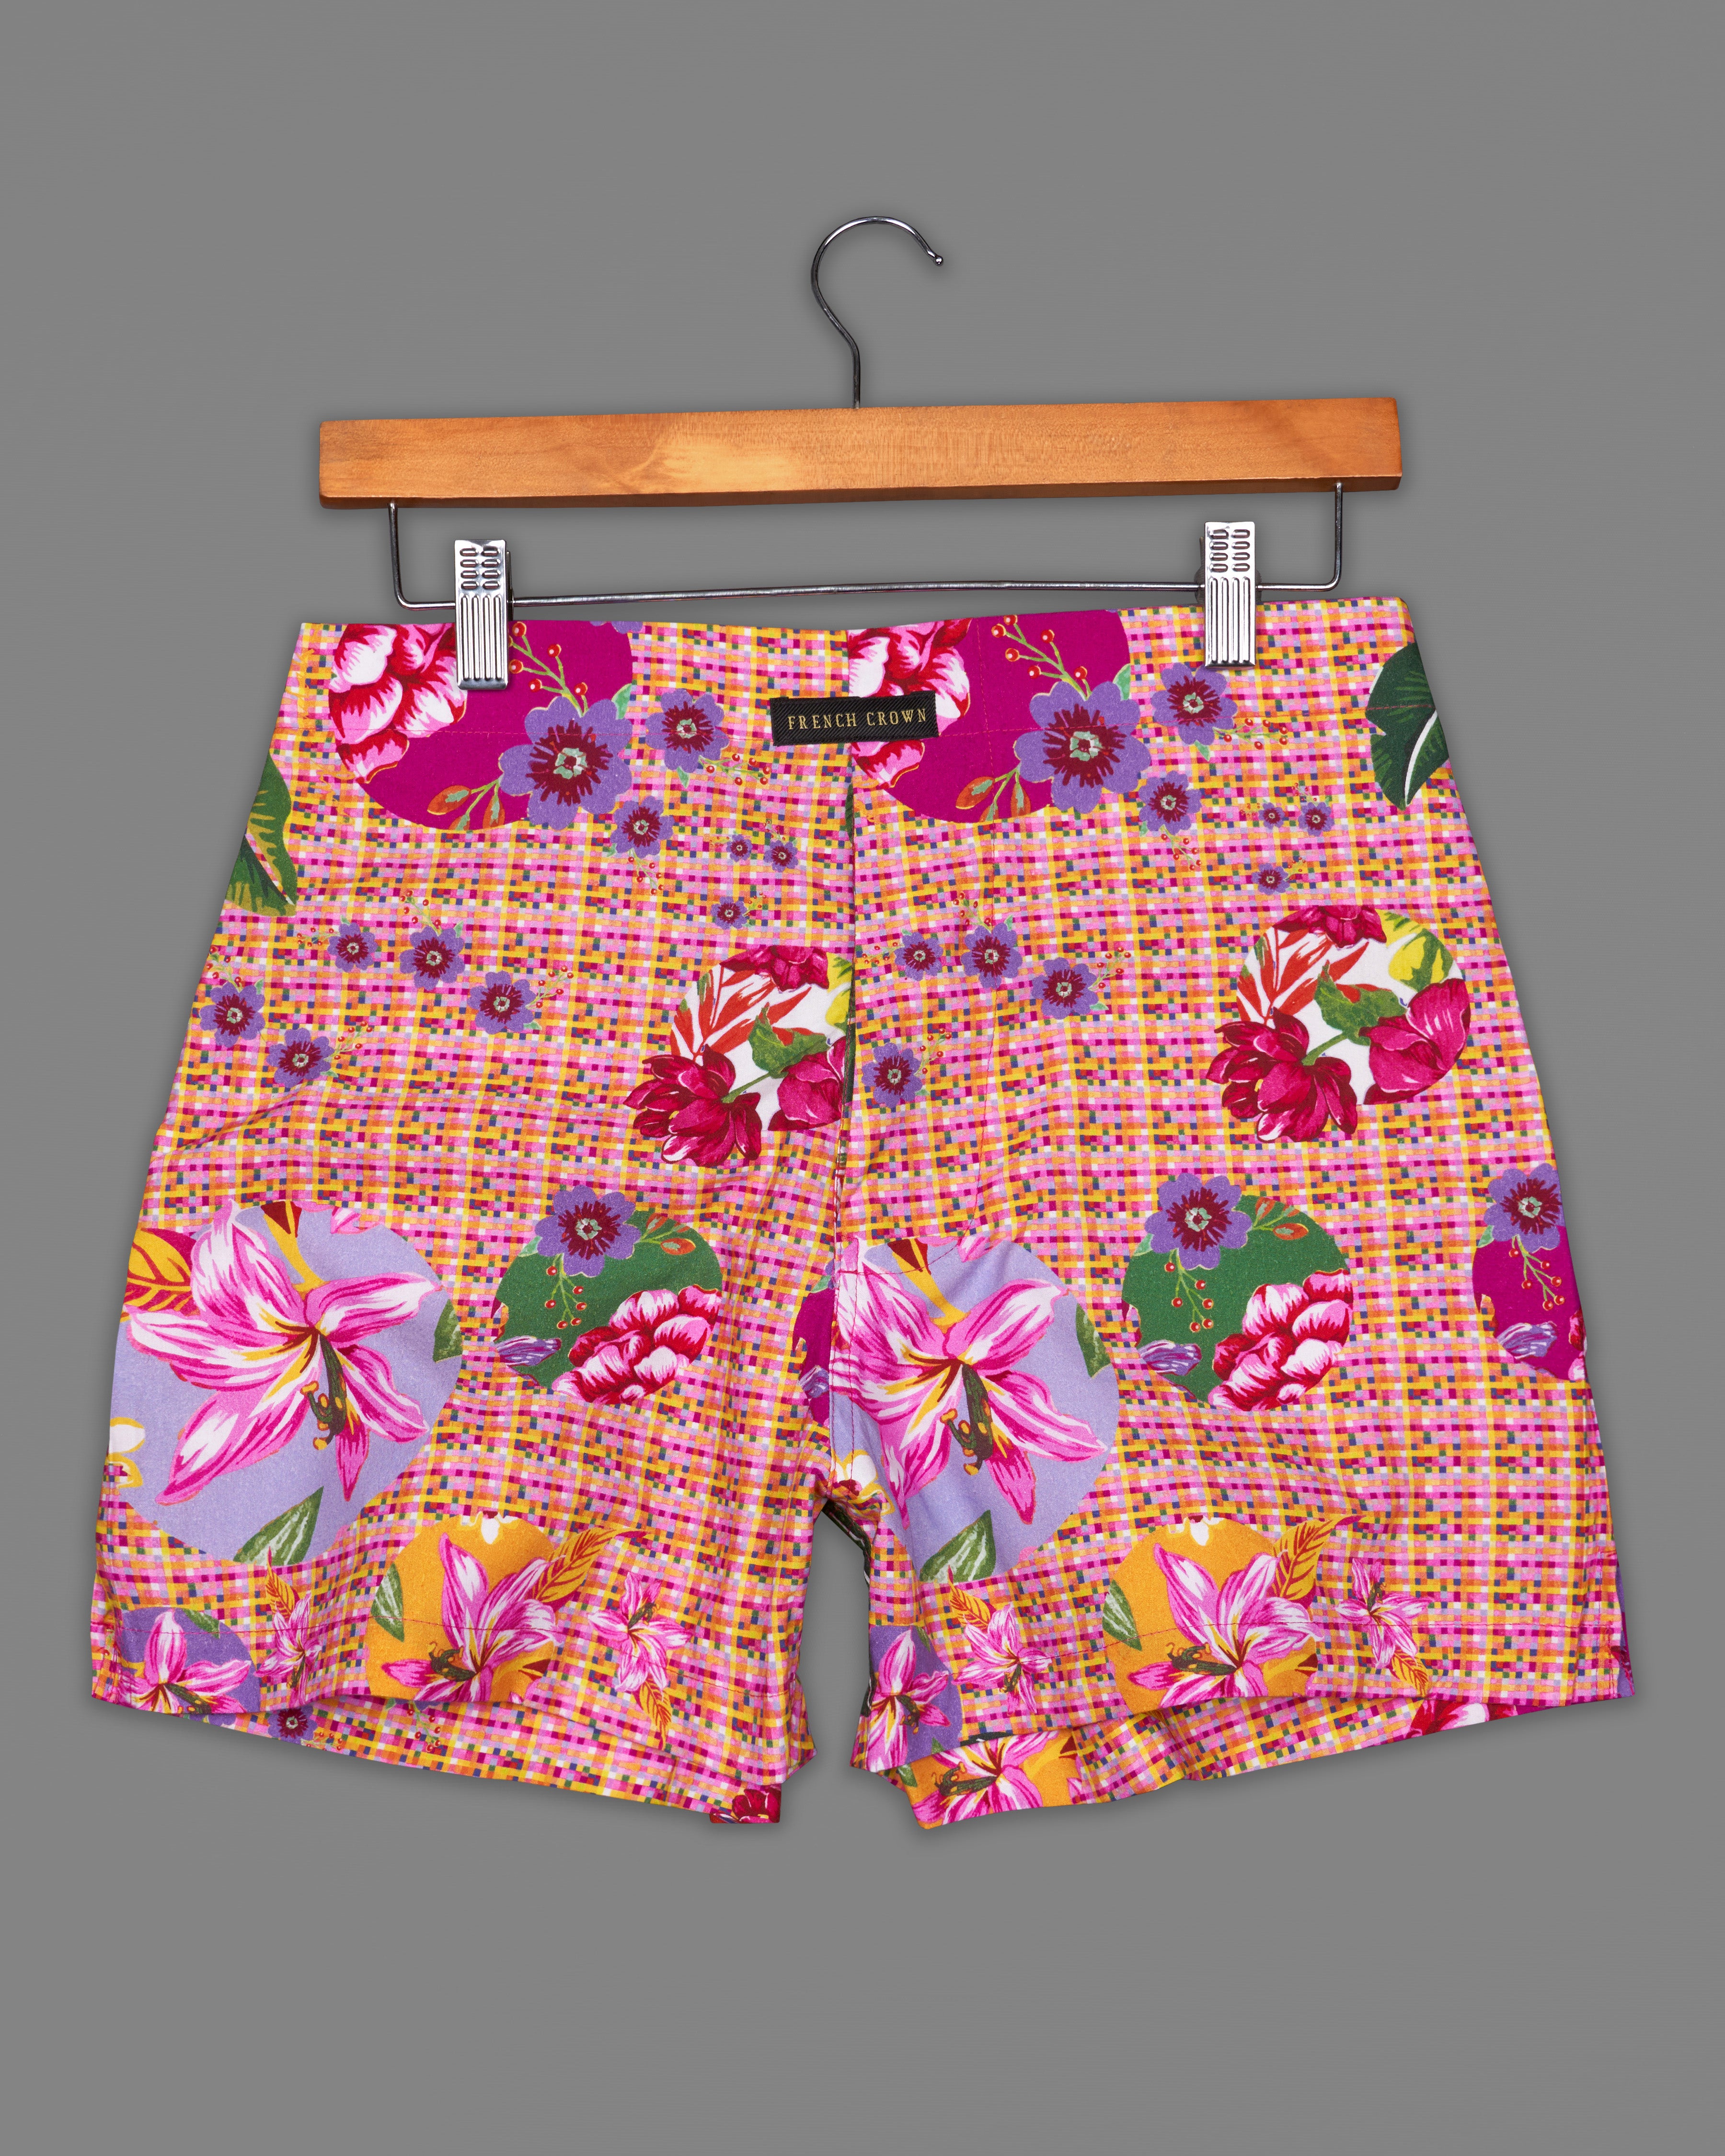 Amarnath Pink with Como Green Tropical Printed Premium Cotton Boxers BX433-28, BX433-30, BX433-32, BX433-34, BX433-36, BX433-38, BX433-40, BX433-42, BX433-44